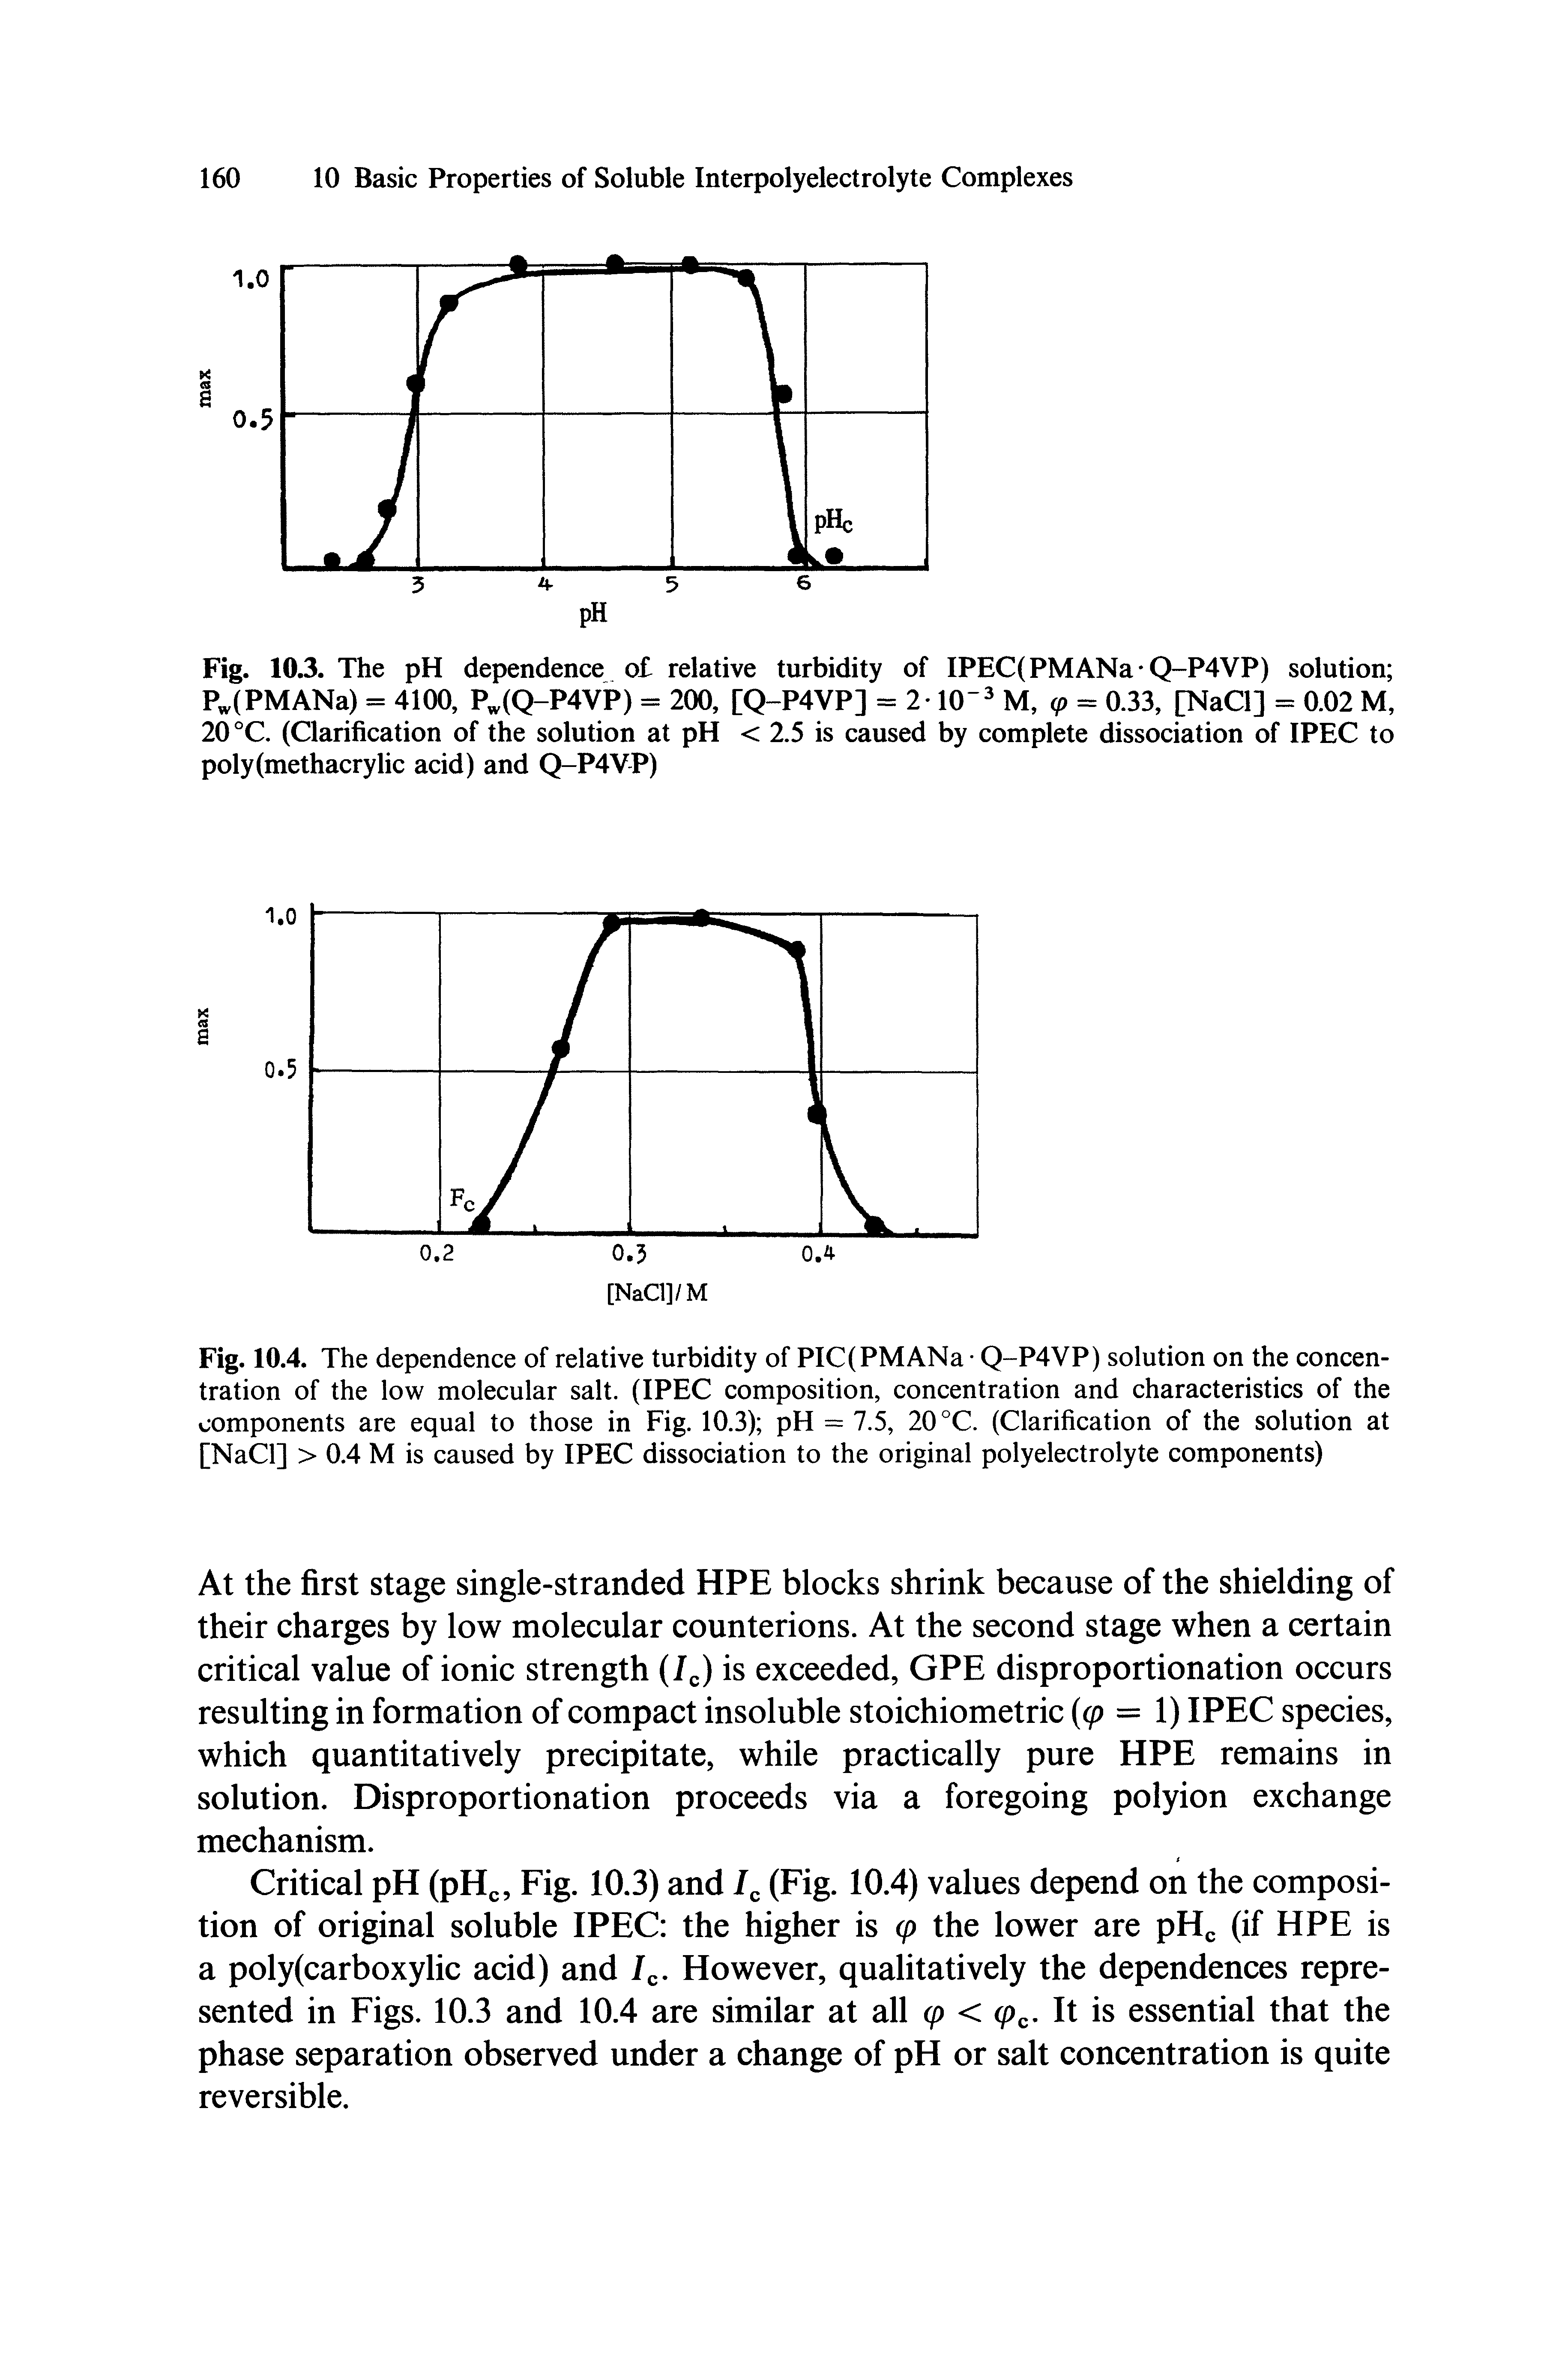 Fig. 10.4. The dependence of relative turbidity of PIC(PMANa Q-P4VP) solution on the concentration of the low molecular salt. (IPEC composition, concentration and characteristics of the components are equal to those in Fig. 10.3) pH = 7.5, 20 °C. (Clarification of the solution at [NaCl] > 0.4 M is caused by IPEC dissociation to the original polyelectrolyte components)...